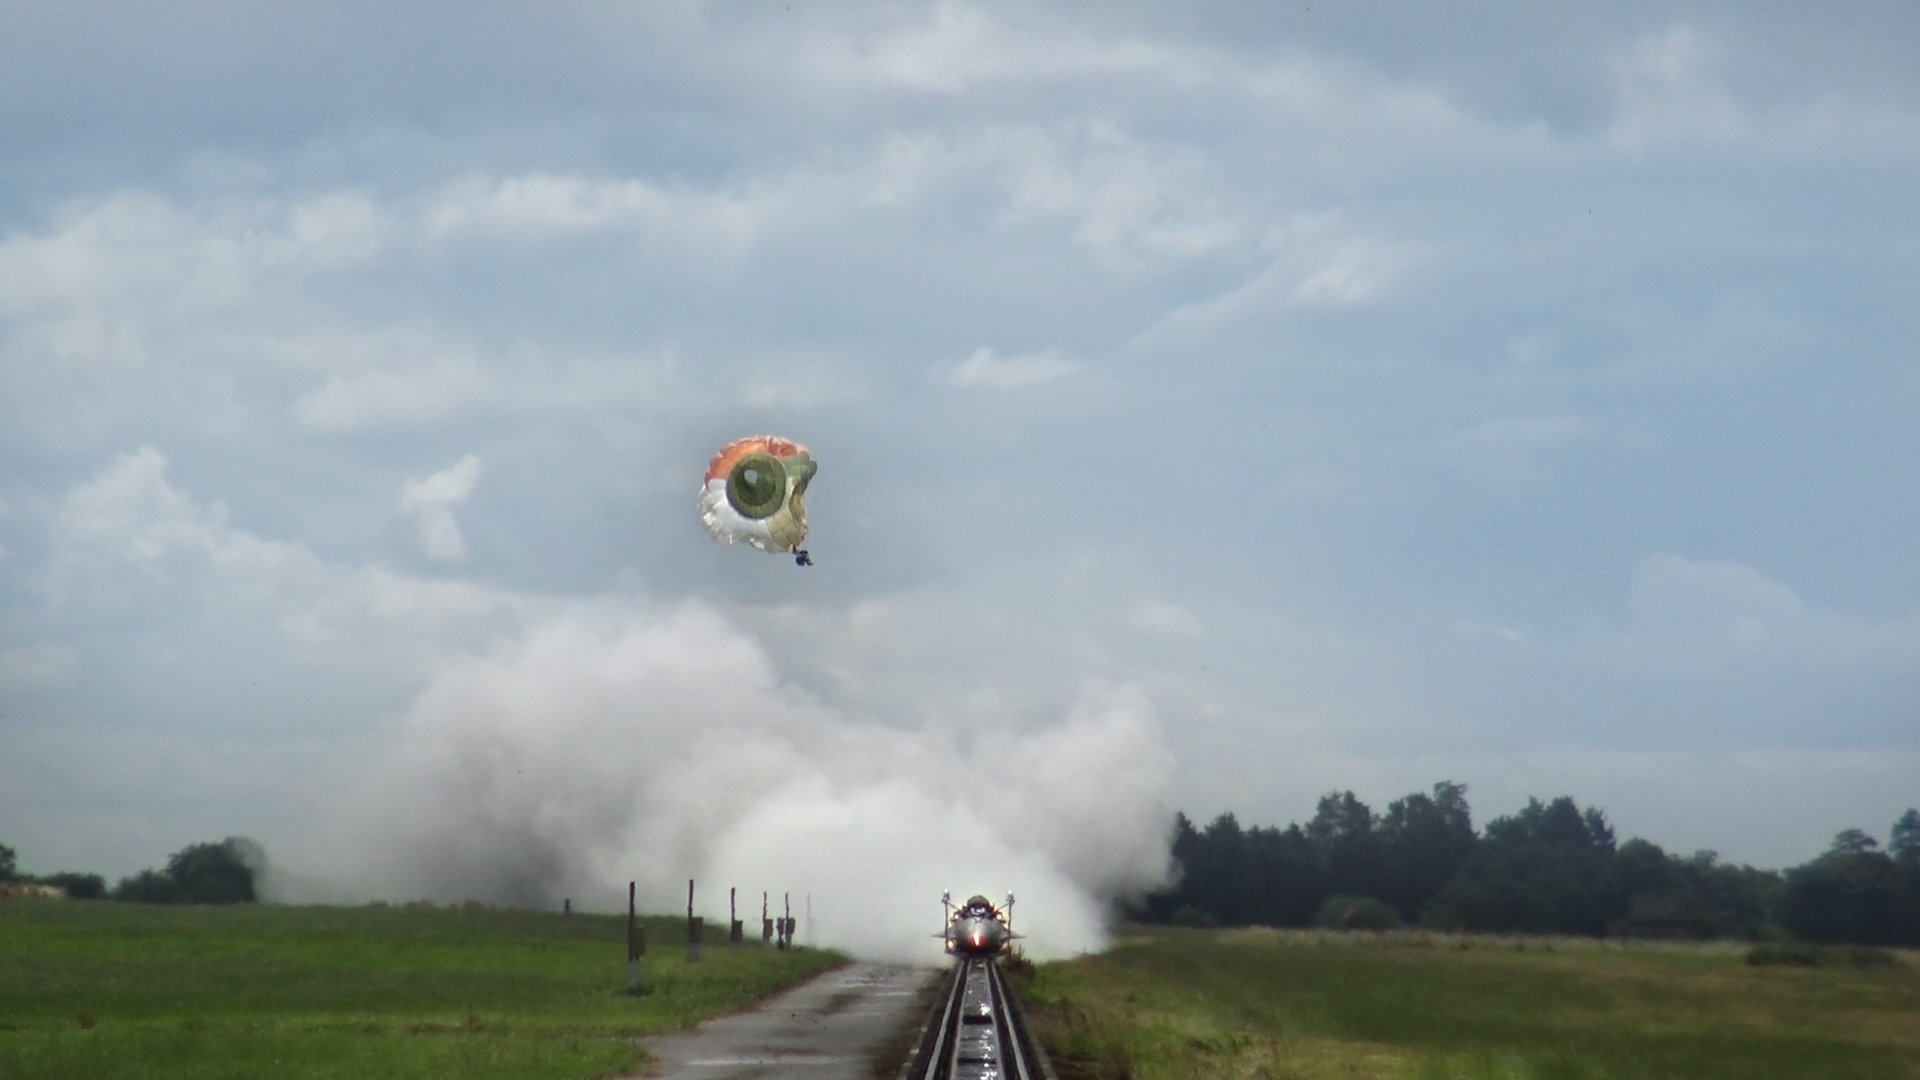 High Speed ejection test viewed from the end of the track